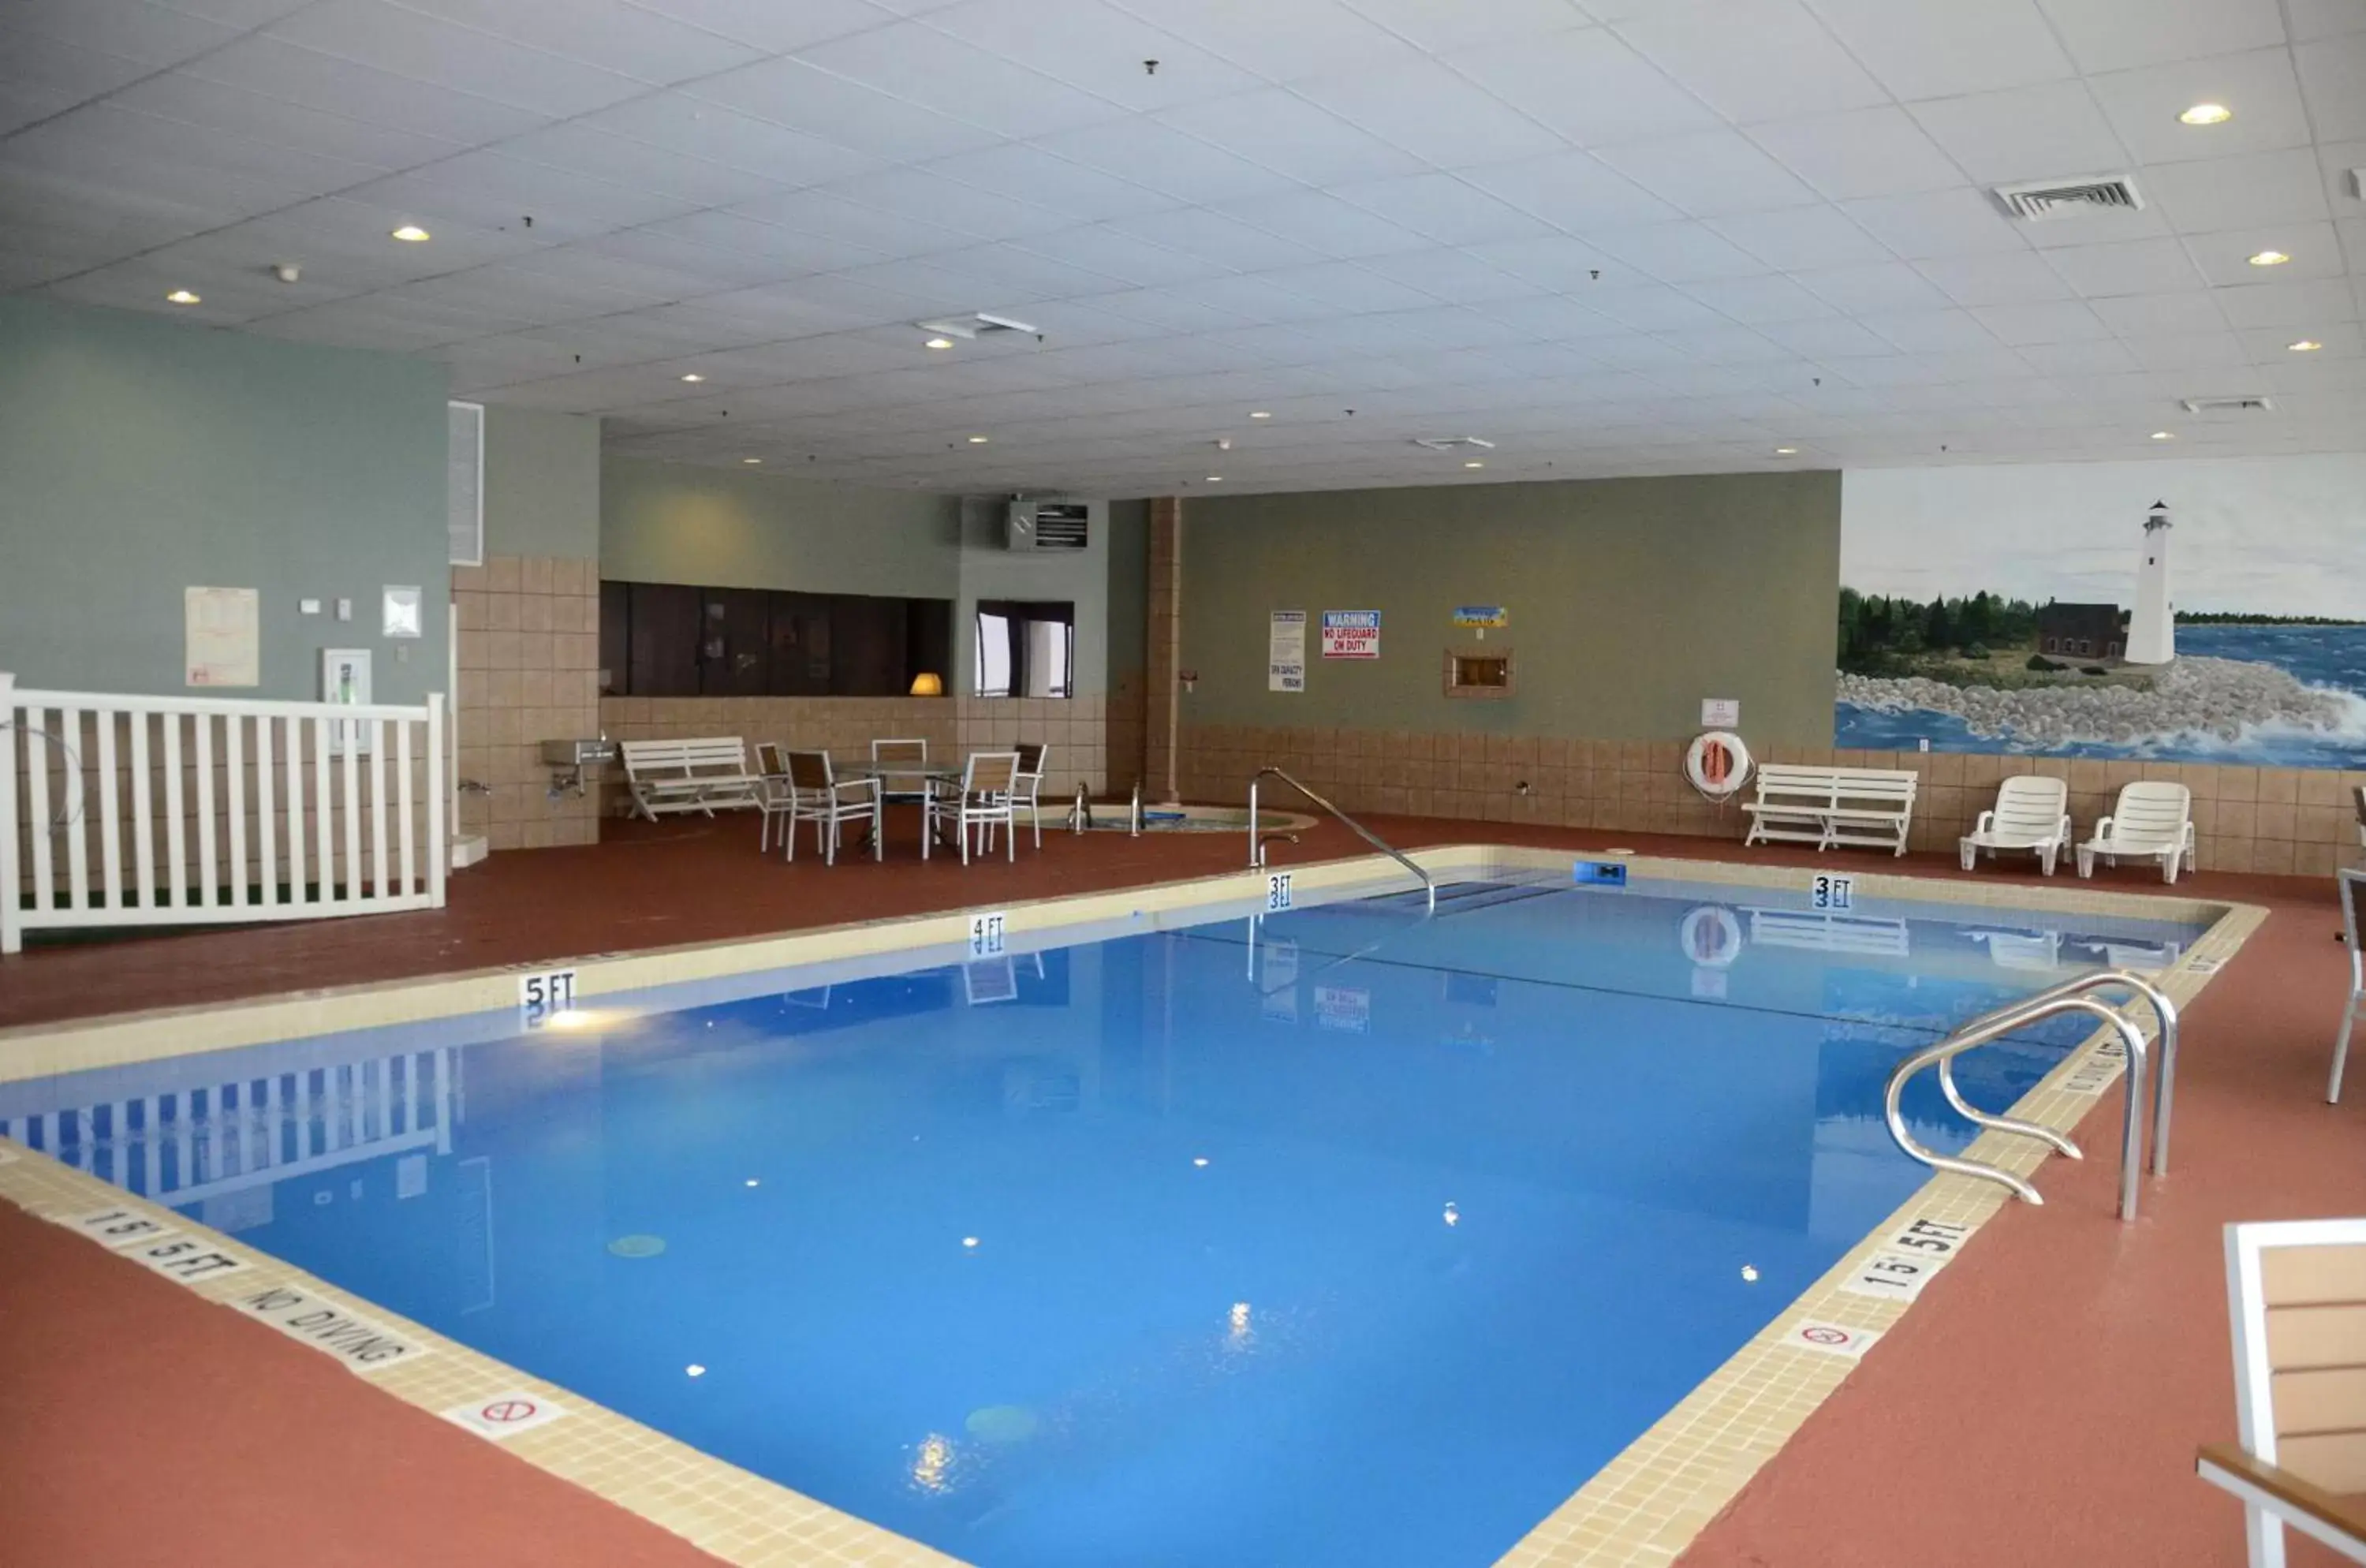 Swimming Pool in Tawas Bay Beach Resort & Conference Center